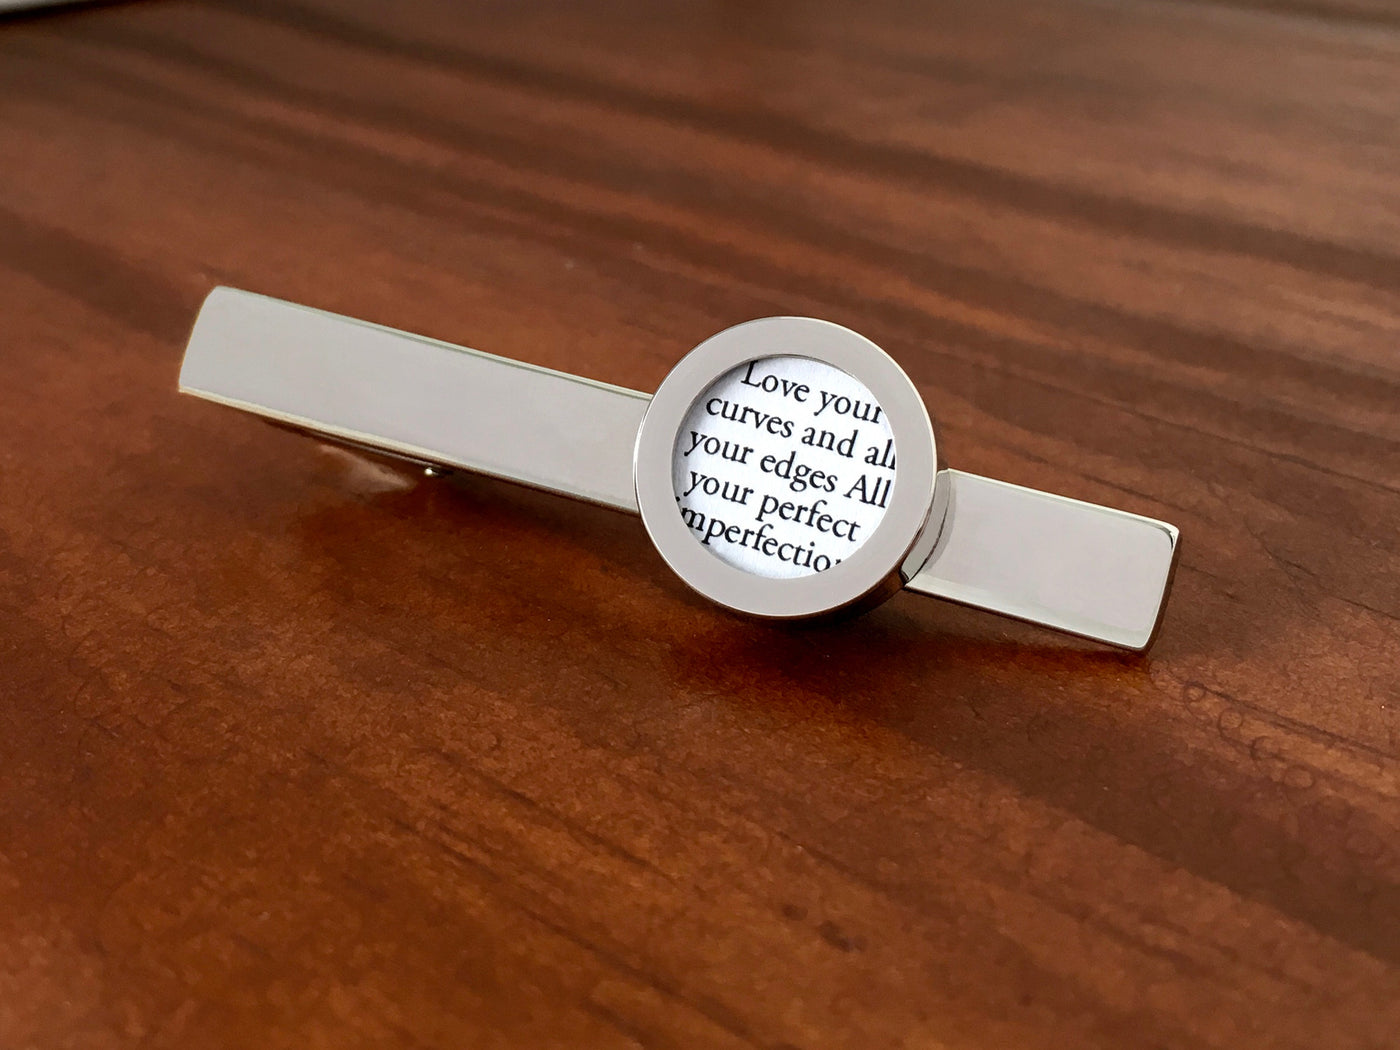 Cufflinks For Him - Tie Clip With Vows Or Song